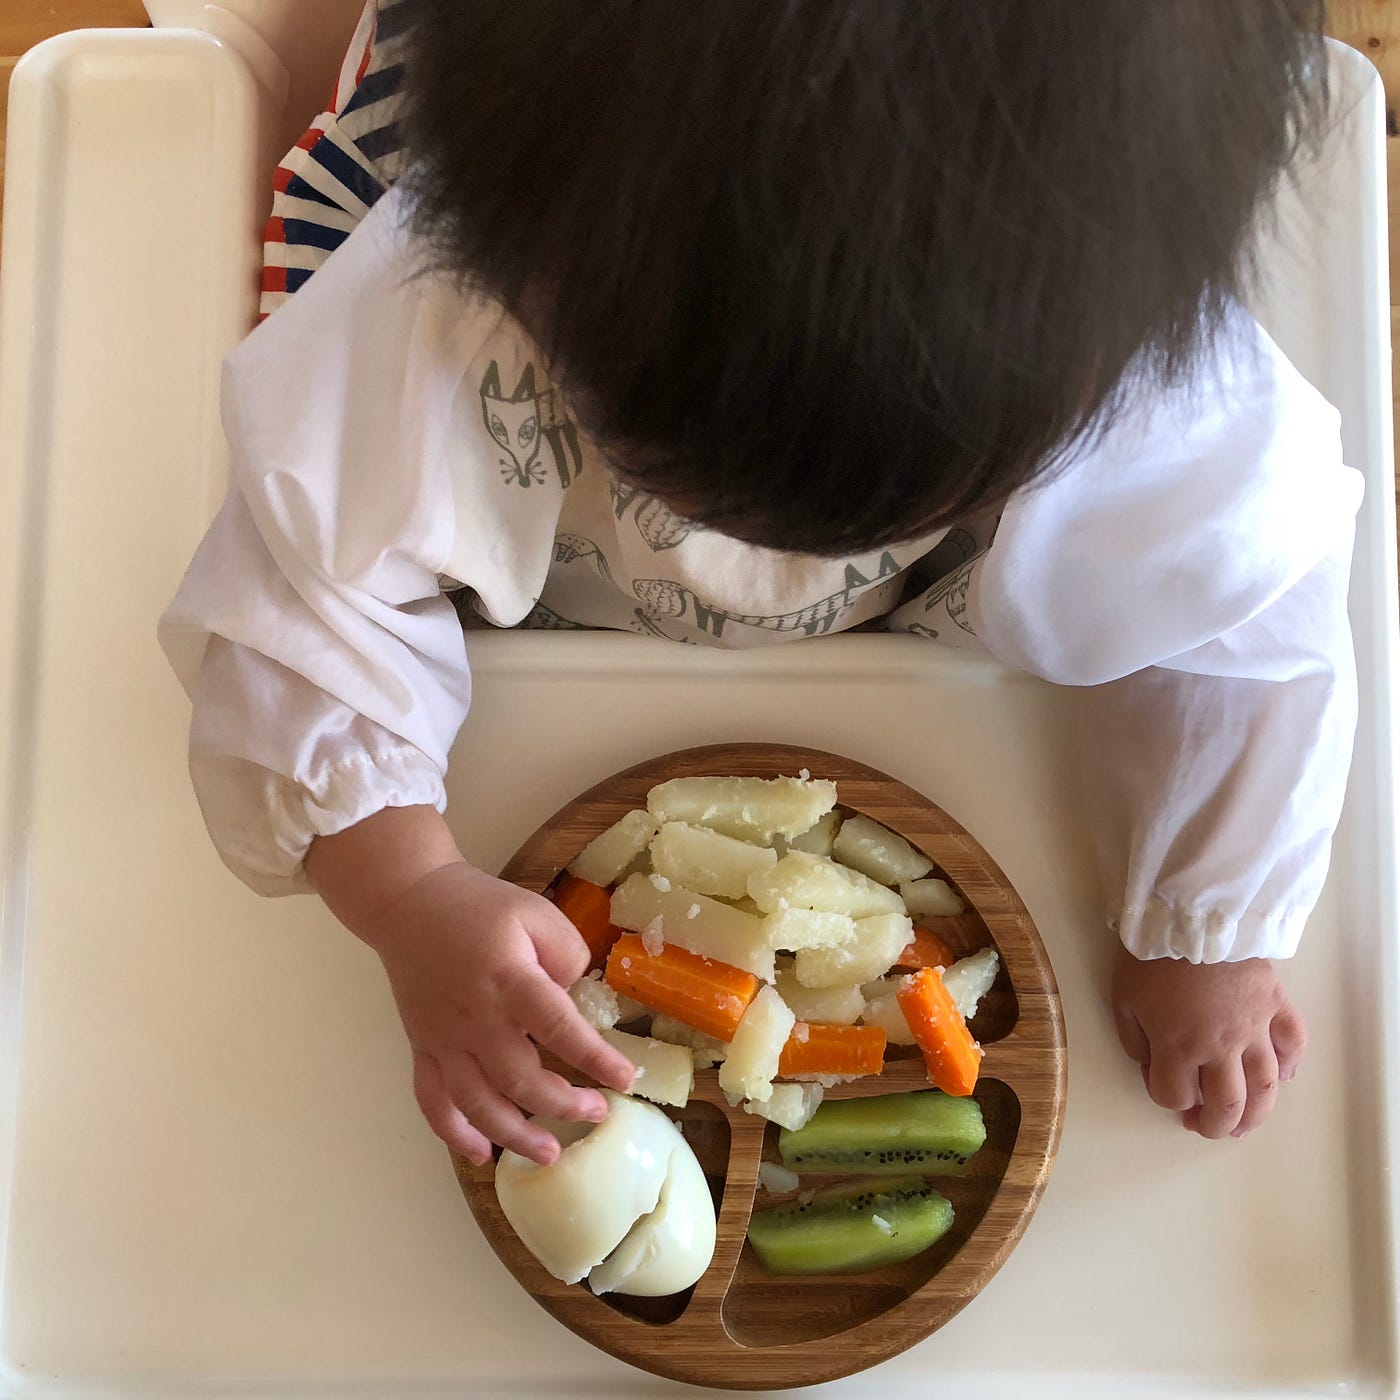 Everyday Baby-Led Weaning - Because I Said So, Baby